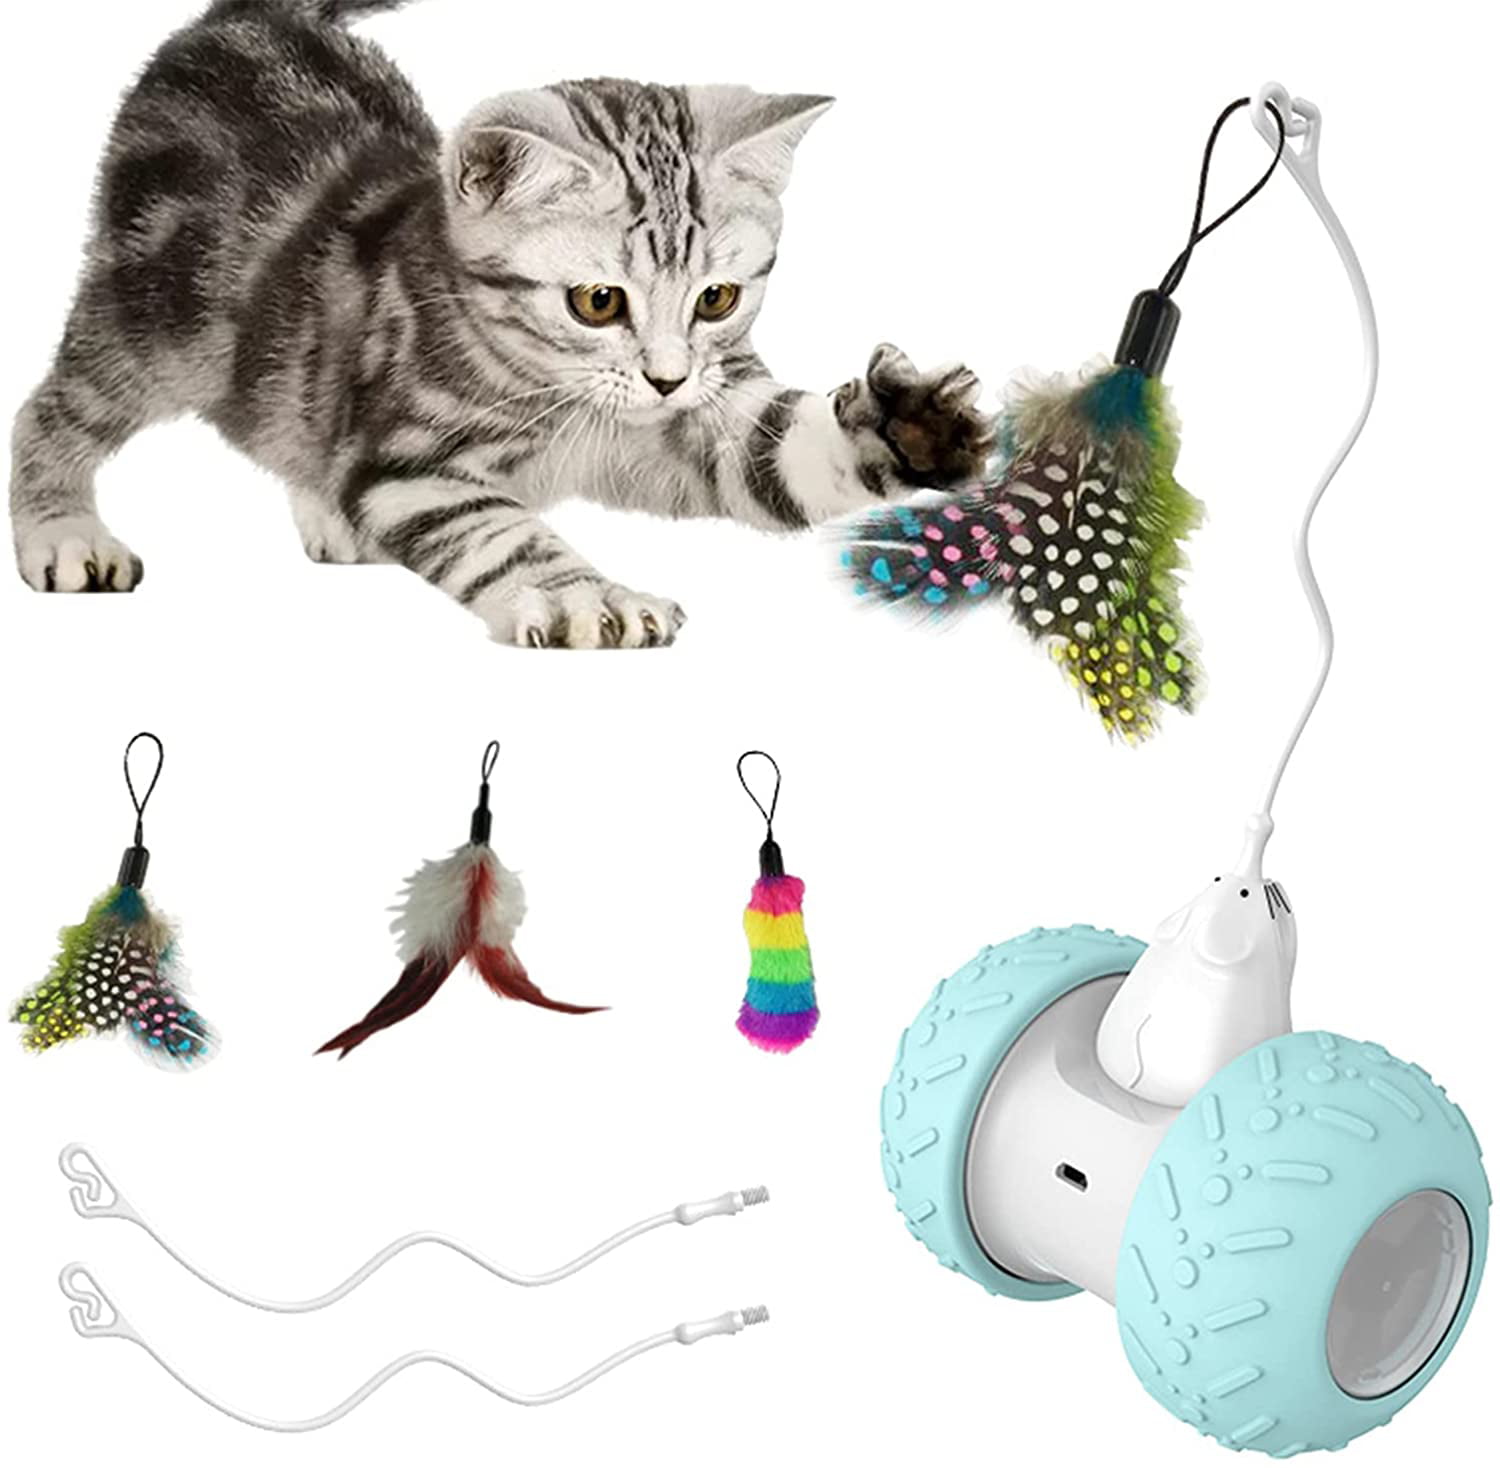 Black 2 in 1 Interactive Cat Toys Automatic 360 Degree Rotation Cat Ball Toy Automatic Lifting Cat Chaser Feather Toy